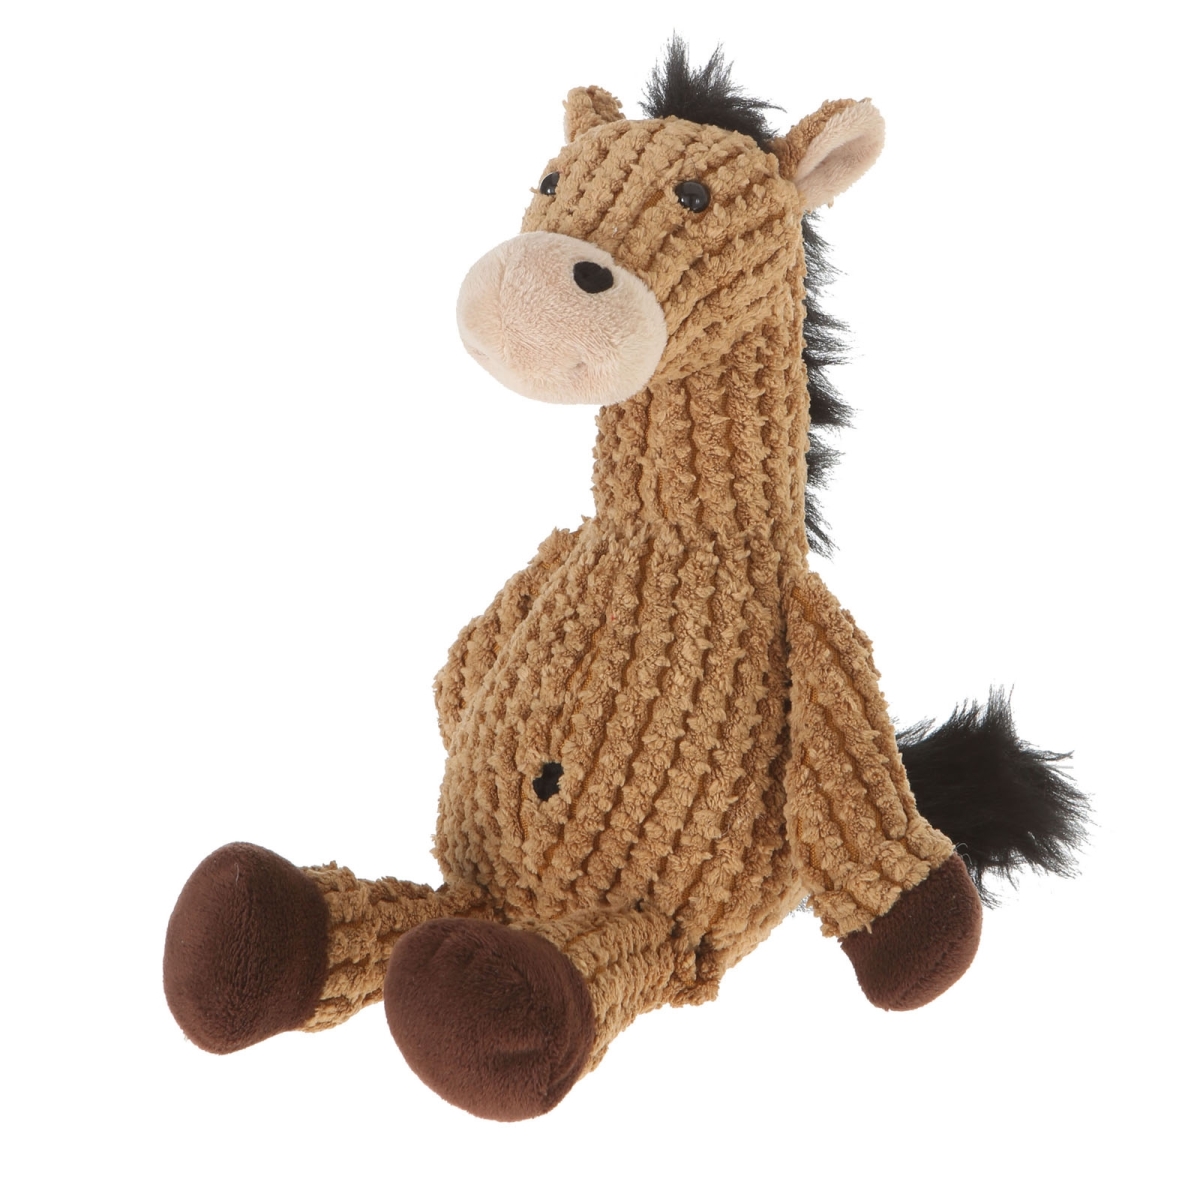 A09025 9 In. Plush Nice N Knitted Horse - Light Brown